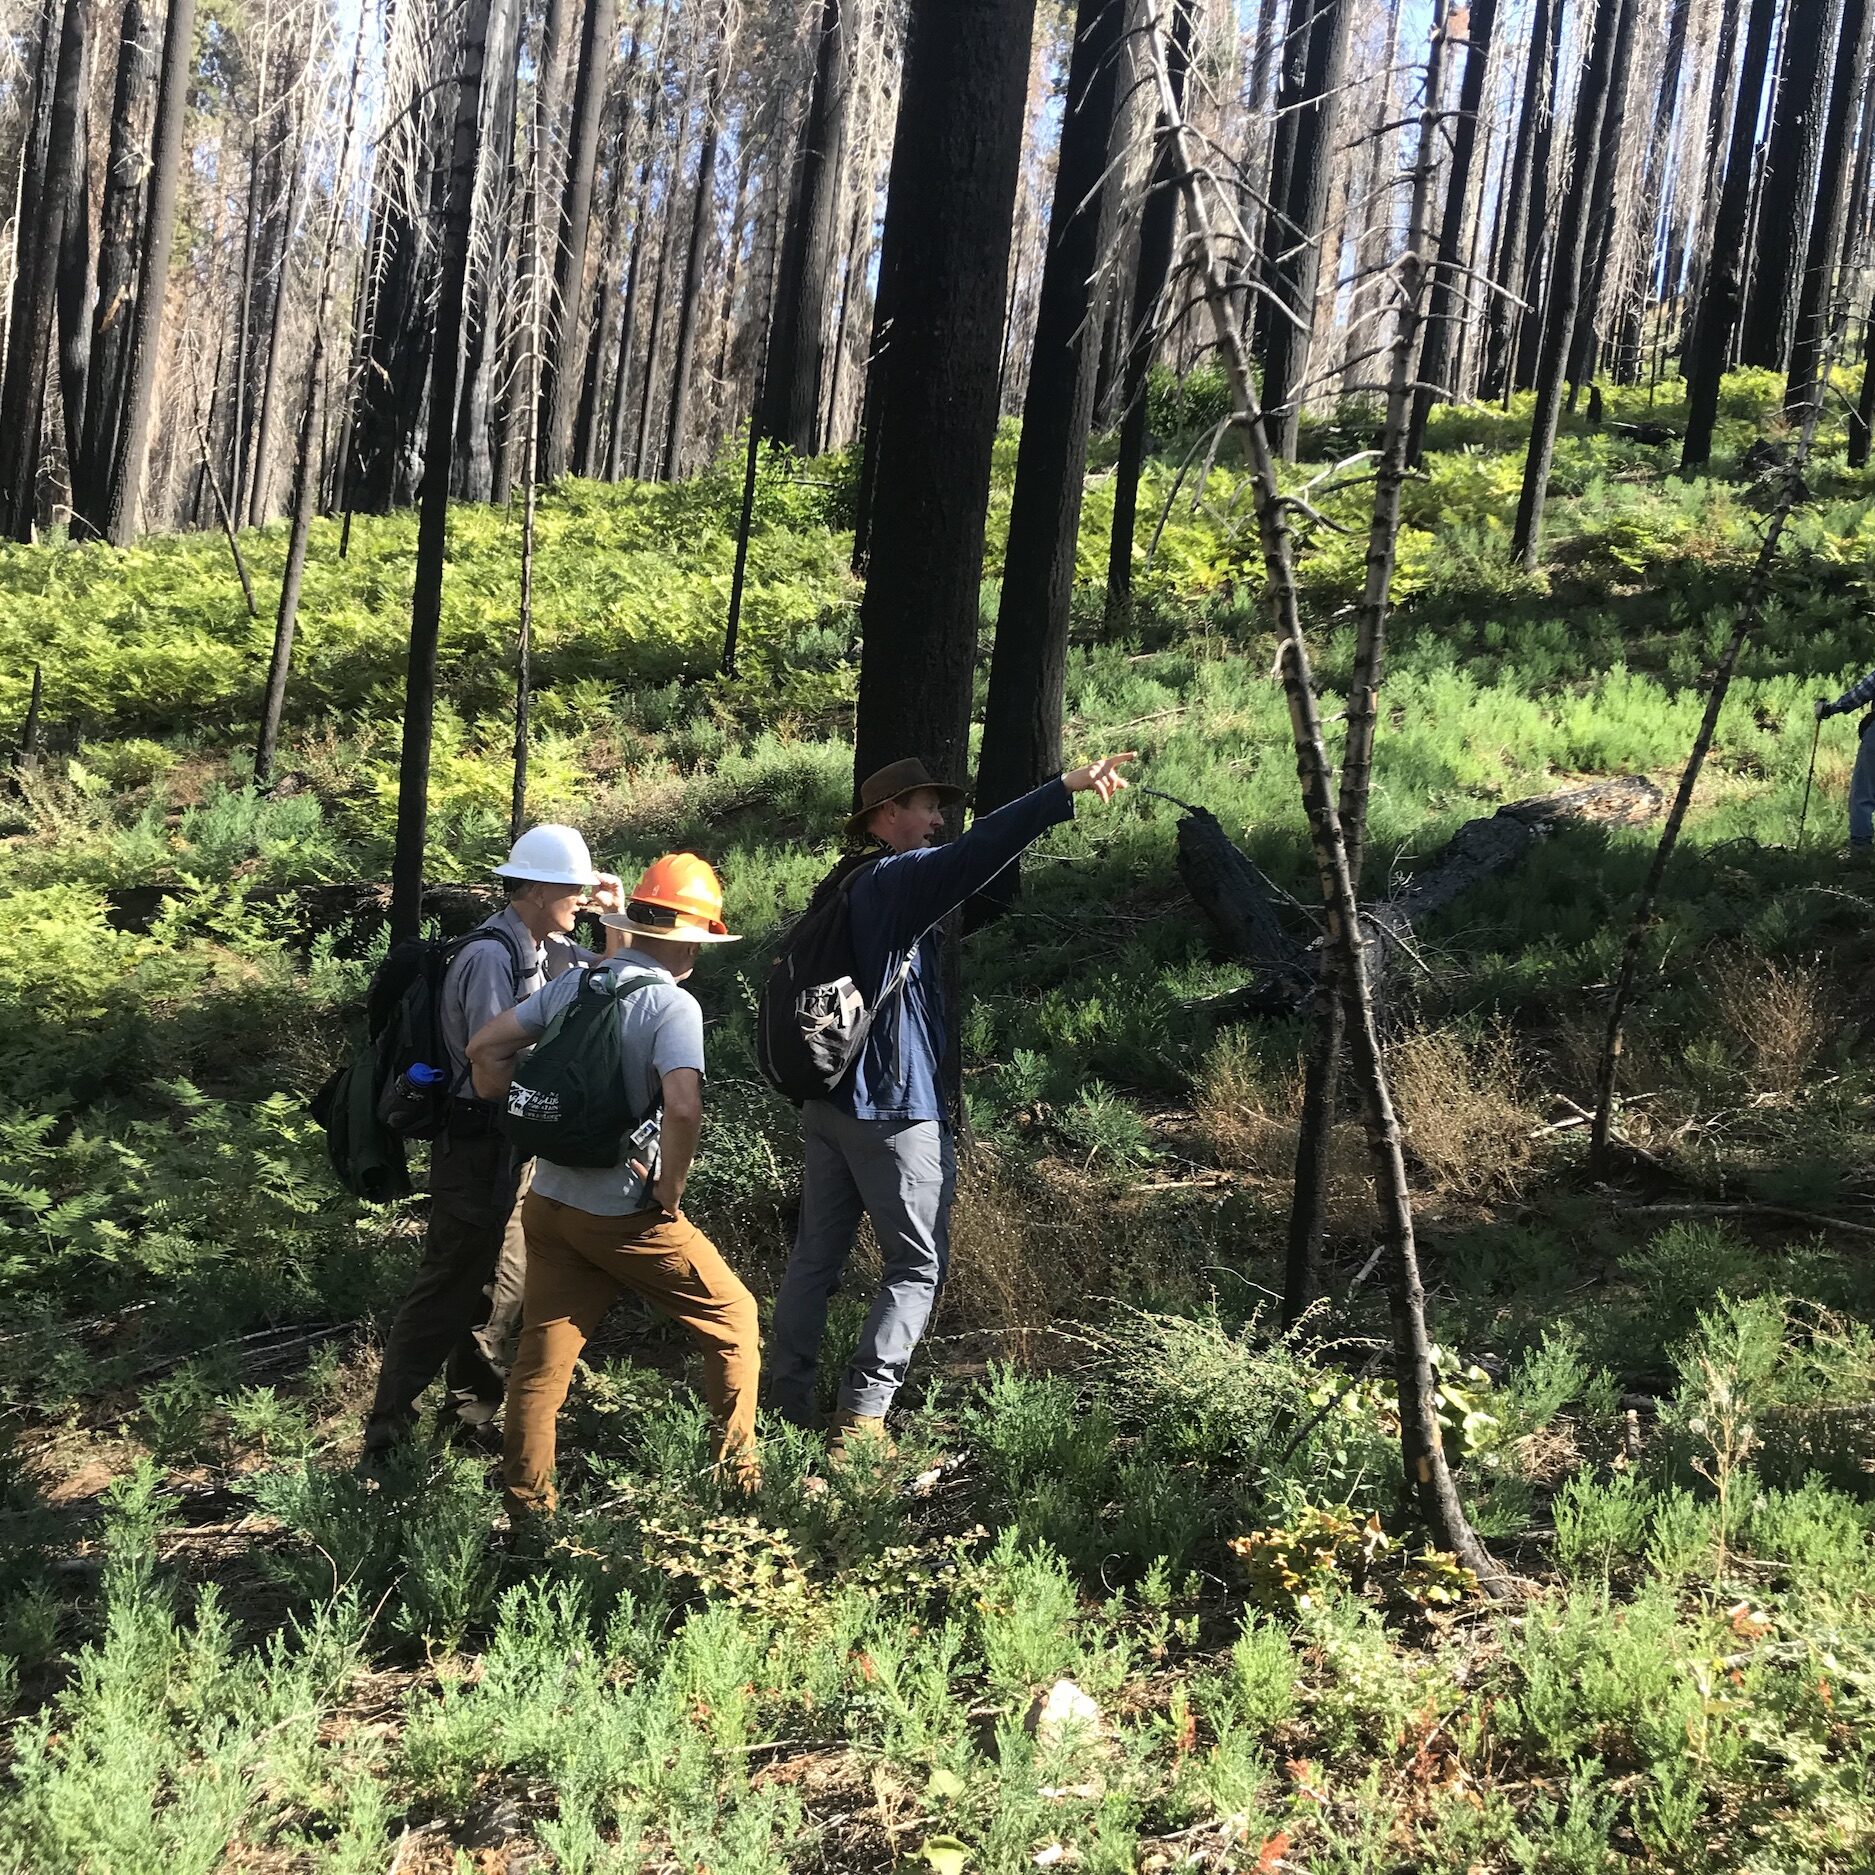 JMP’s Dr. Chad Hanson and colleagues on a site visit with the Superintendent of Sequoia and Kings Canyon National Parks, surrounded by a sea of giant sequoia seedlings in a high-intensity fire patch where the Park was falsely telling the public that sequoia regeneration was absent or lacking.